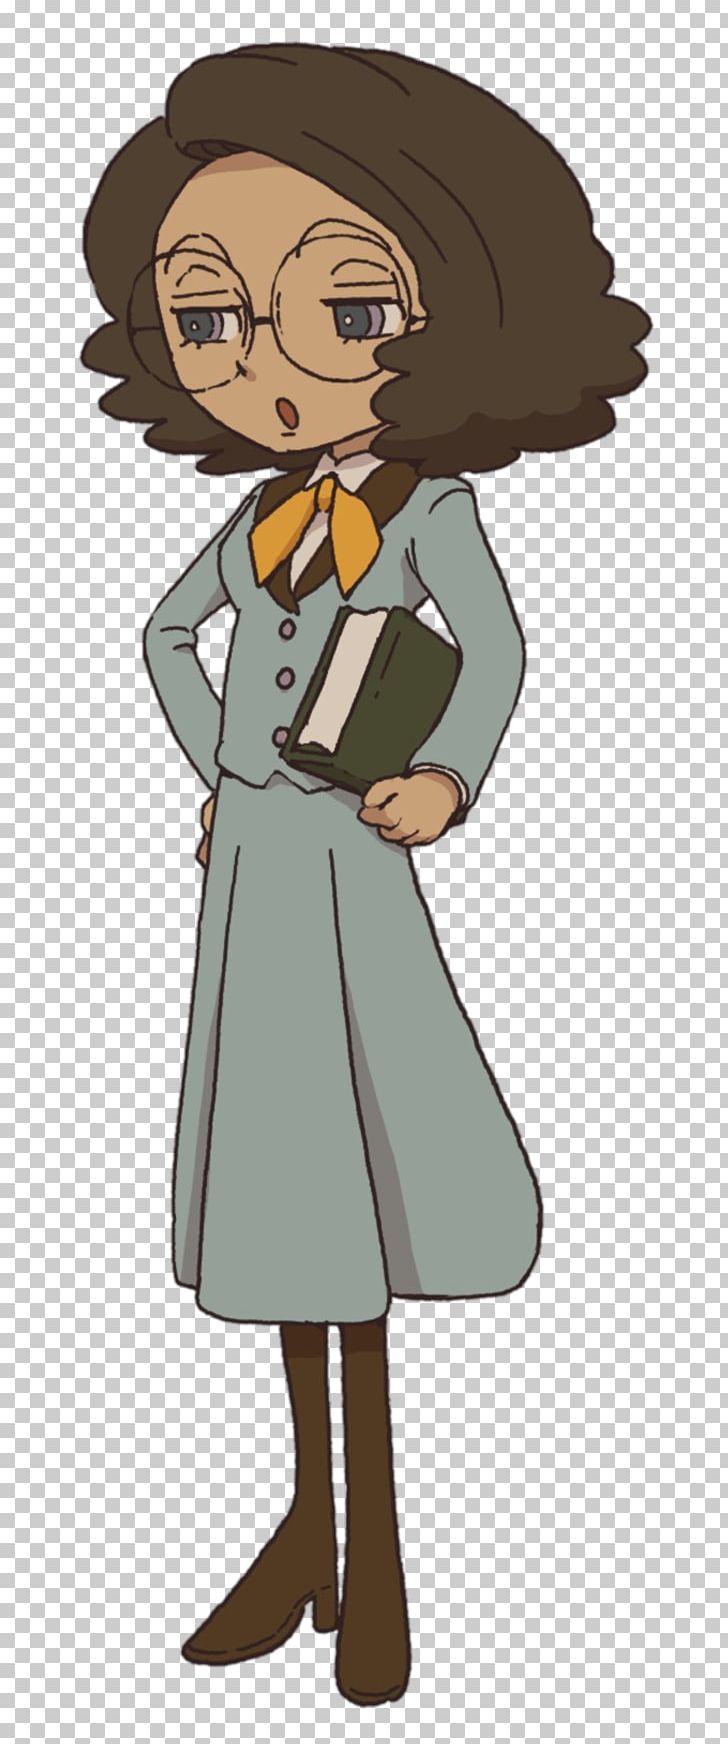 Layton's Mystery Journey: Katrielle And The Millionaires' Conspiracy Professor Layton And The Unwound Future Professor Layton And The Azran Legacies Professor Hershel Layton Layton 7 PNG, Clipart, Adventure Game, Cartoon, Fictional Character, Game, Girl Free PNG Download